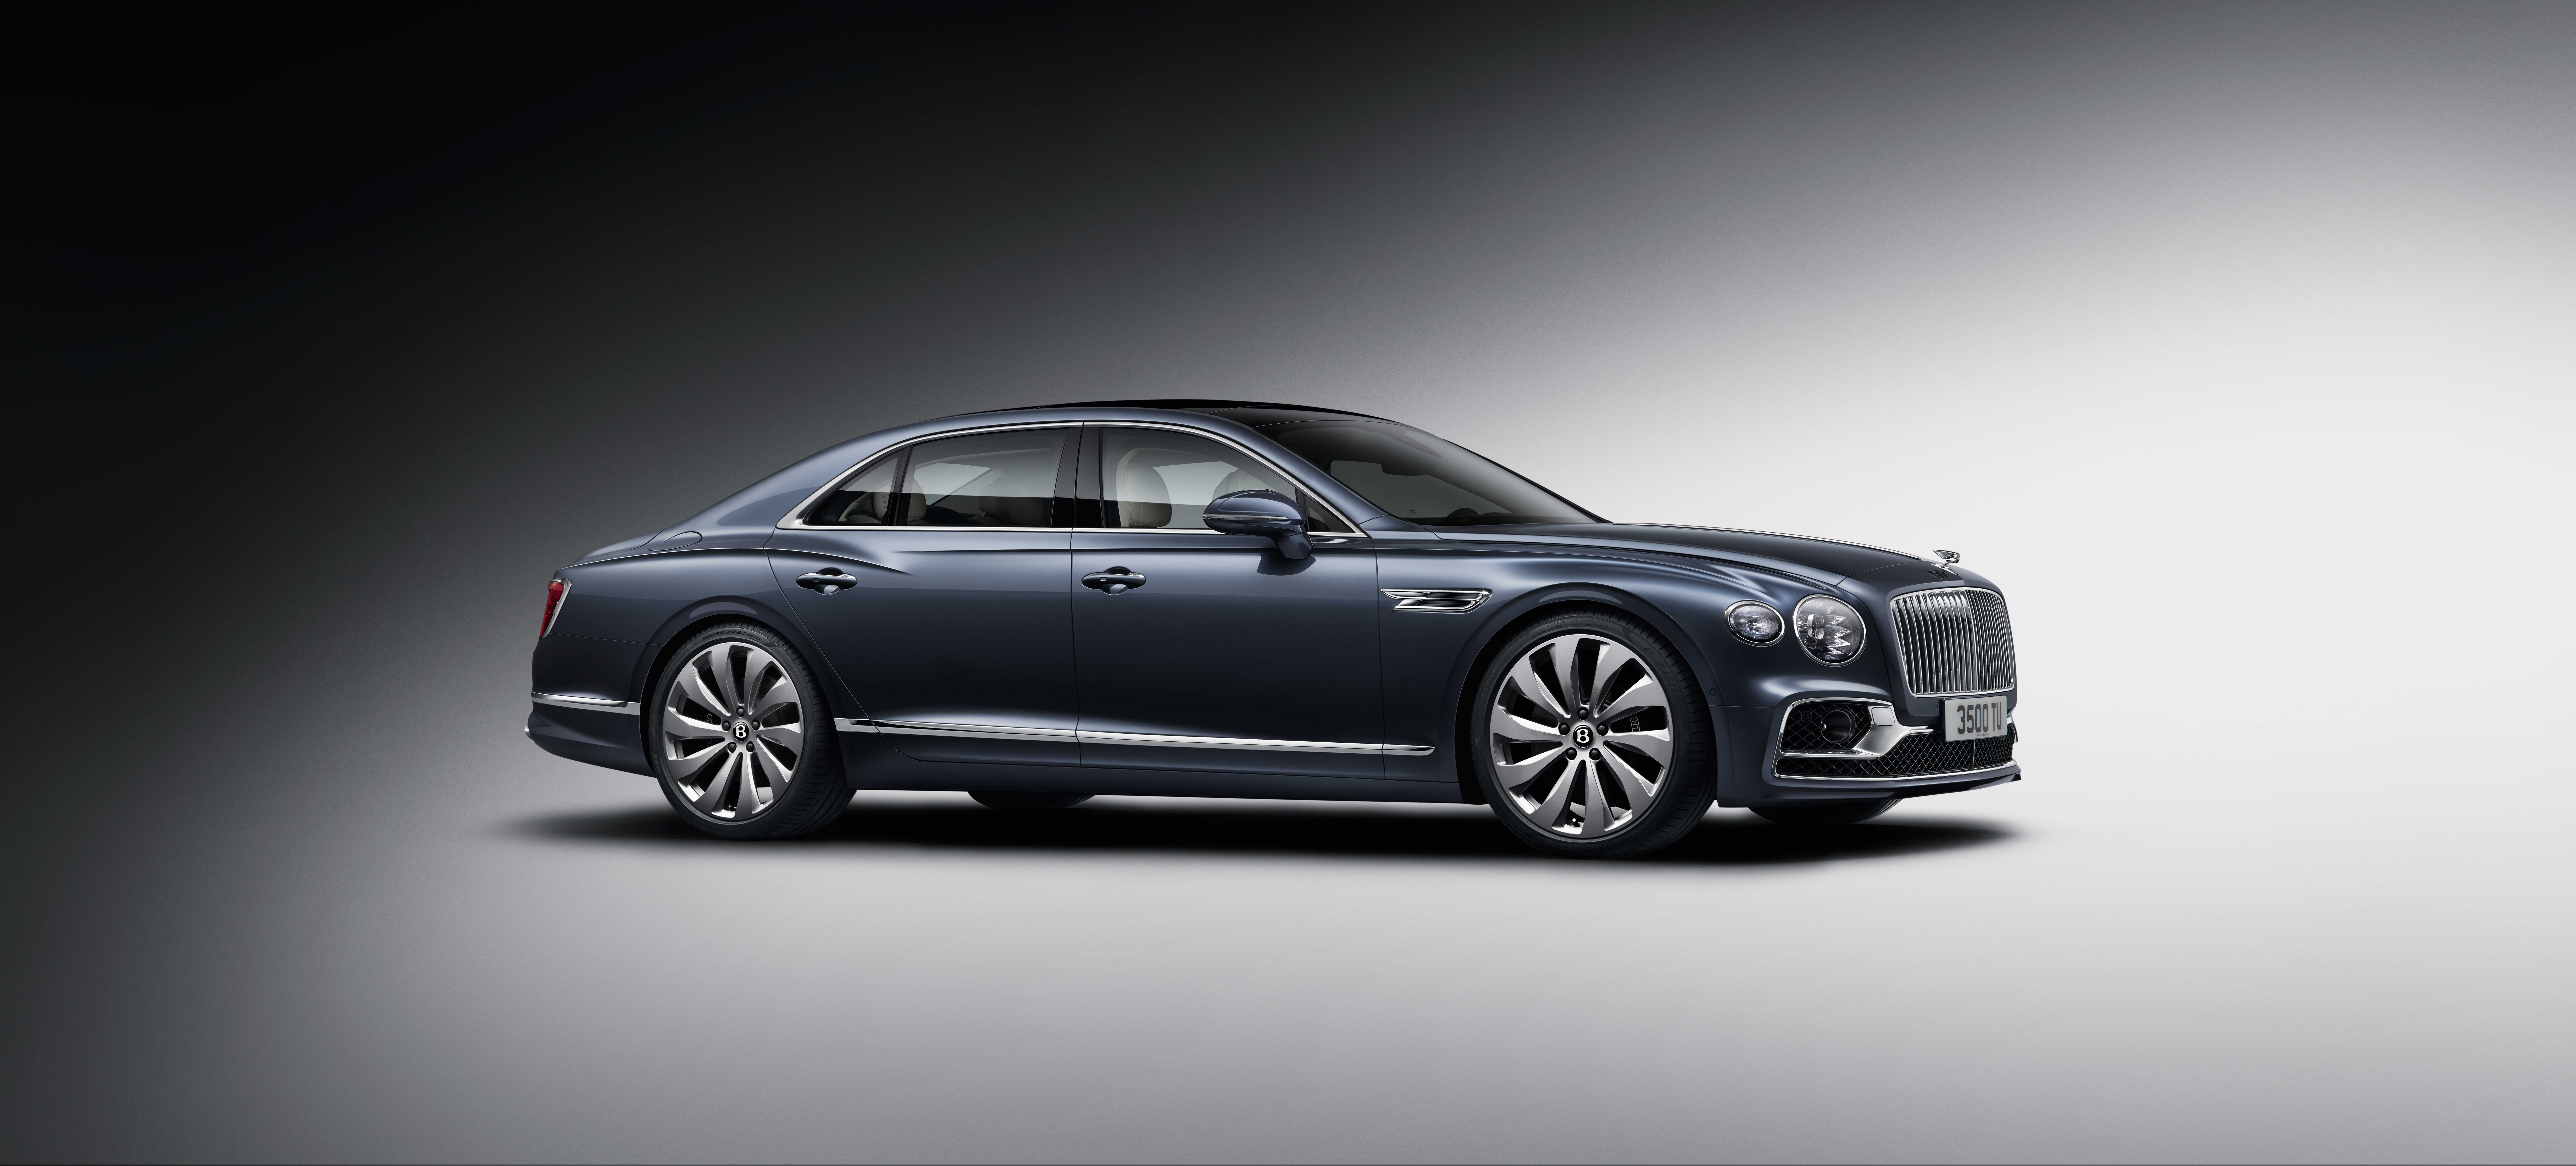 Bentley Introduces New Flying Spur With Boatloads Of Space and Sport